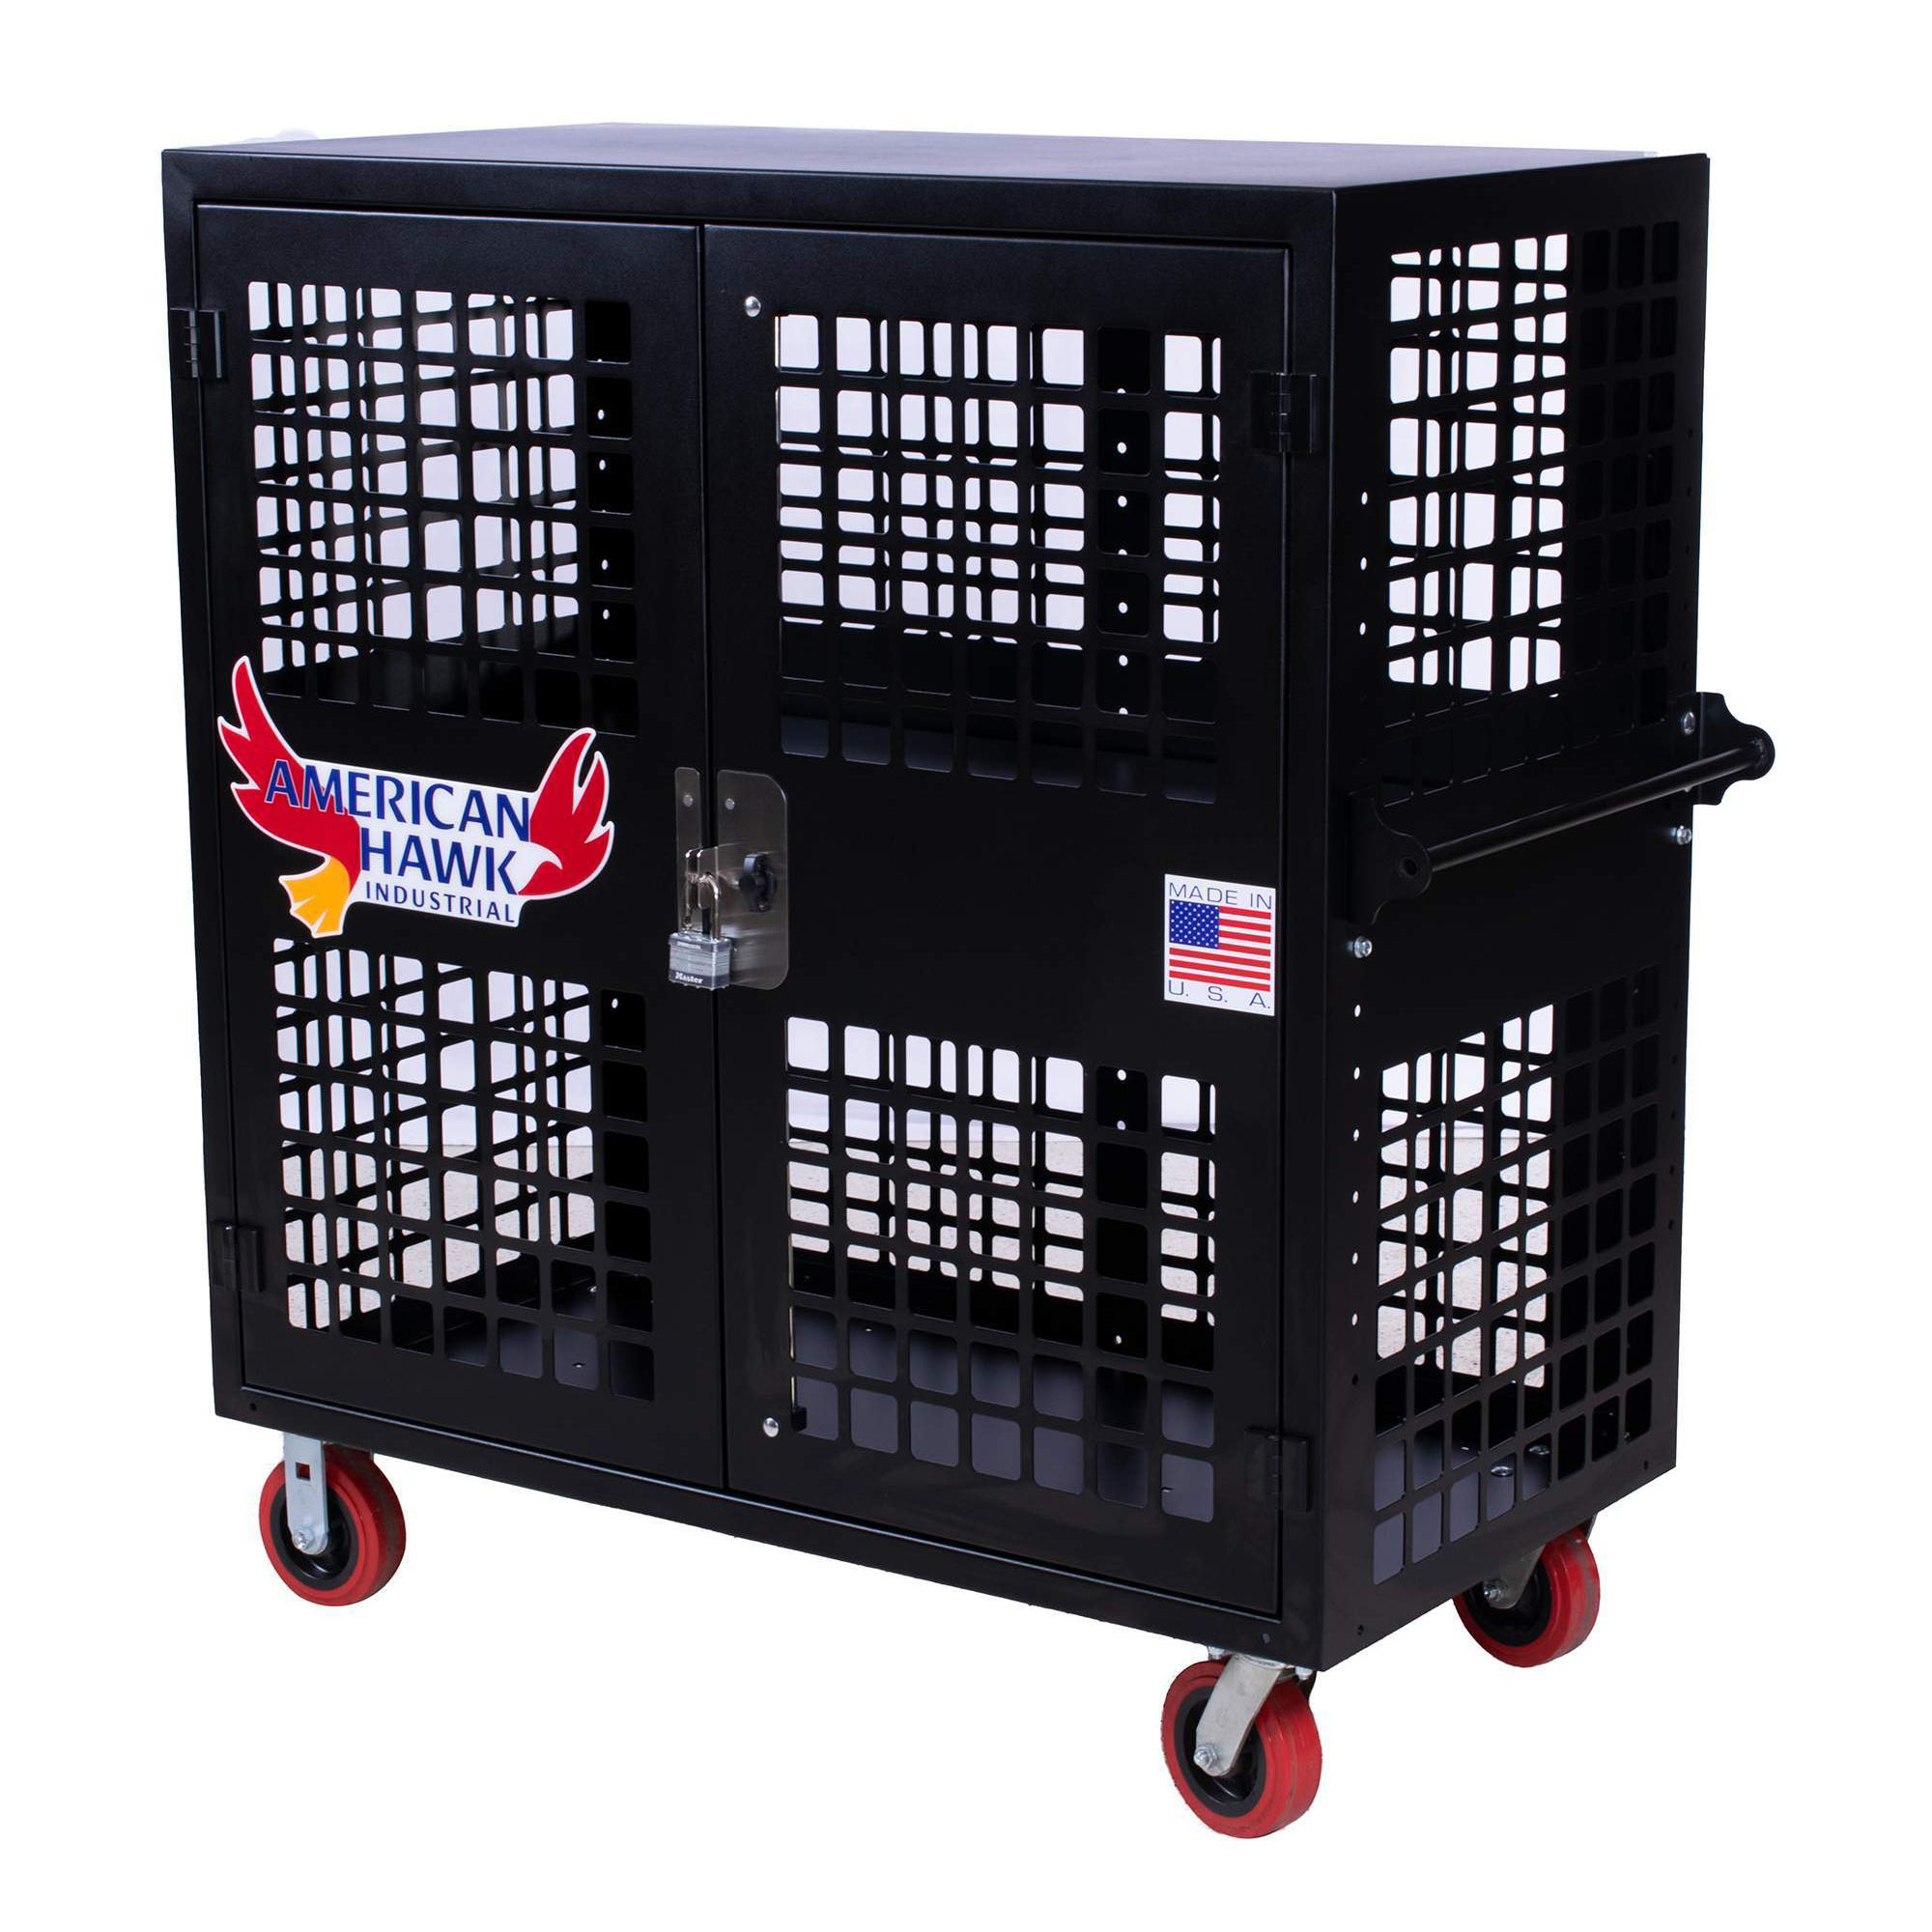 Security Cart, Industrial Security Rolling Cart, Locking Cage, Shop Equipment, 60″ x 36″ Rolling Security Cart, AH-1557 Security Cart, American Hawk Industrial, Dee-Blast